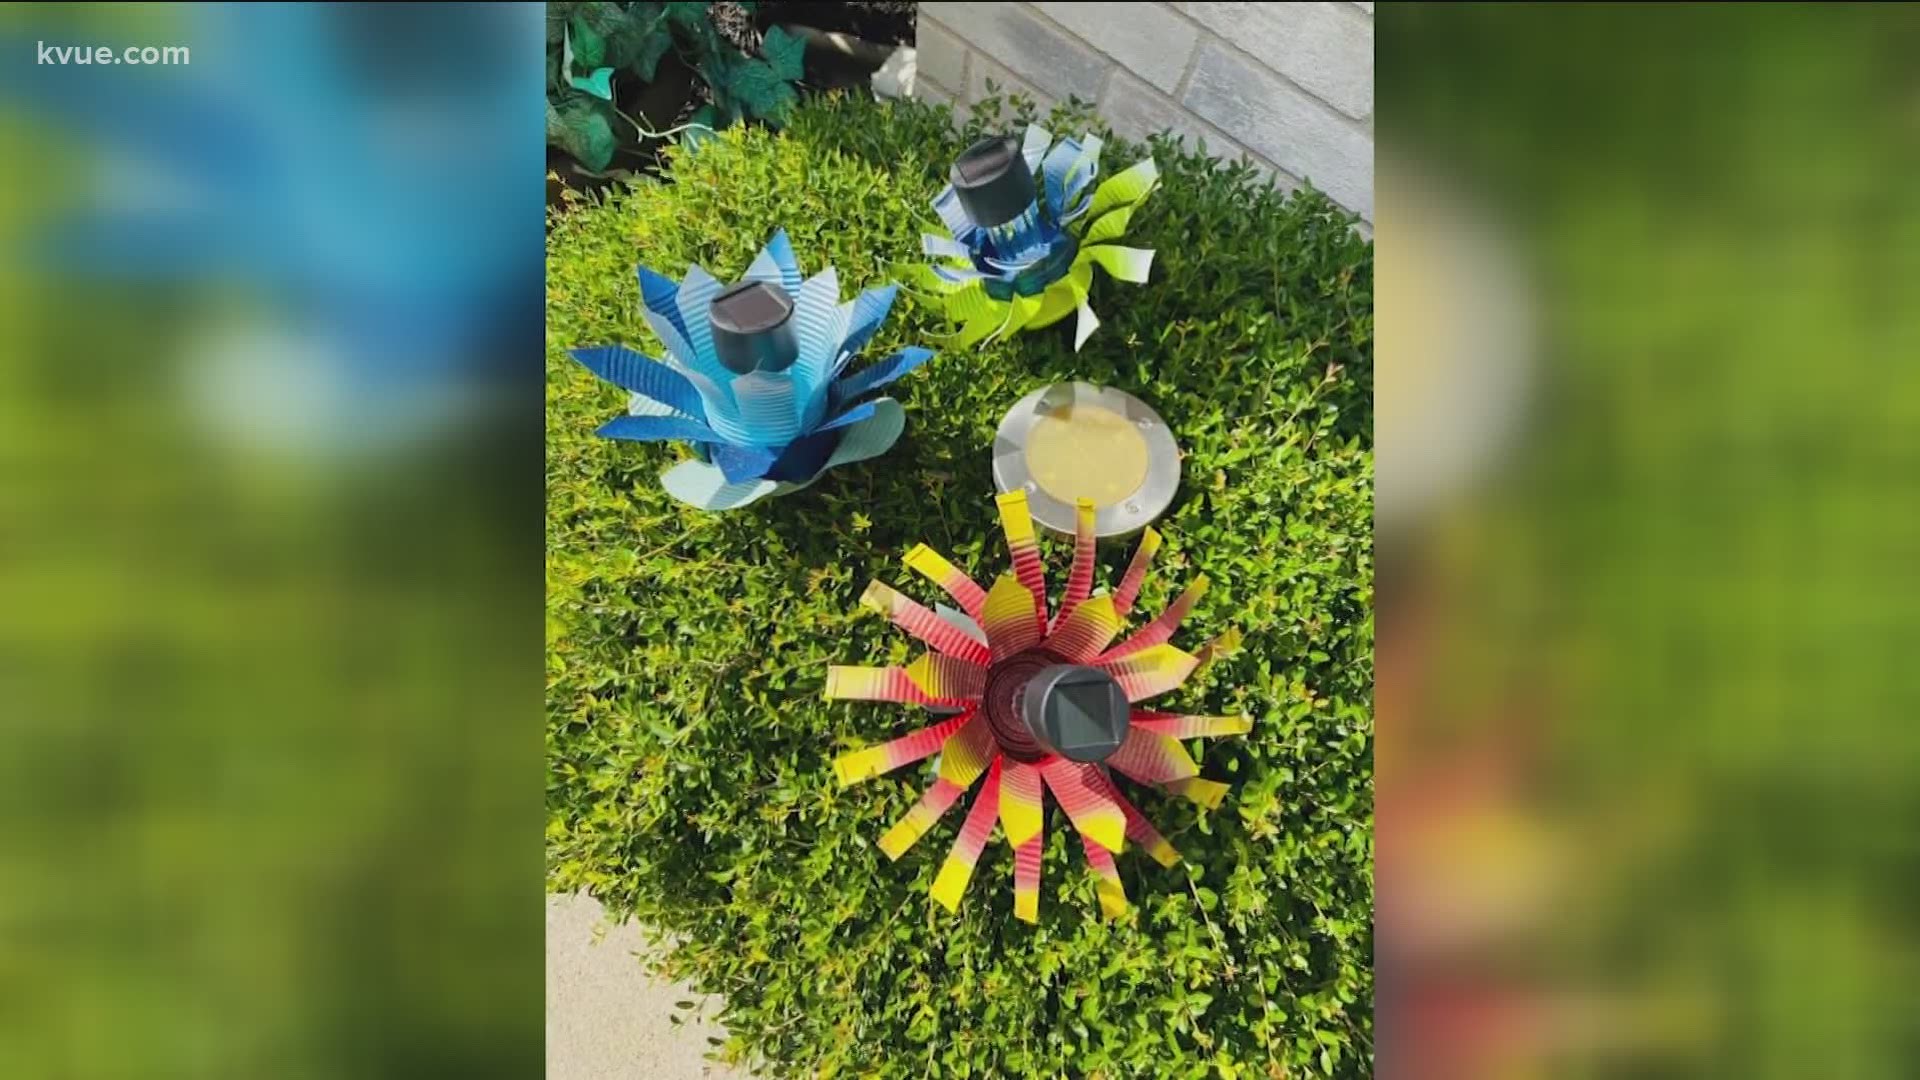 Helping Hands of Hutto started making flowers out of tin cans, painting the flowers and lighting them up with solar-powered lights to brighten lives during COVID-19.